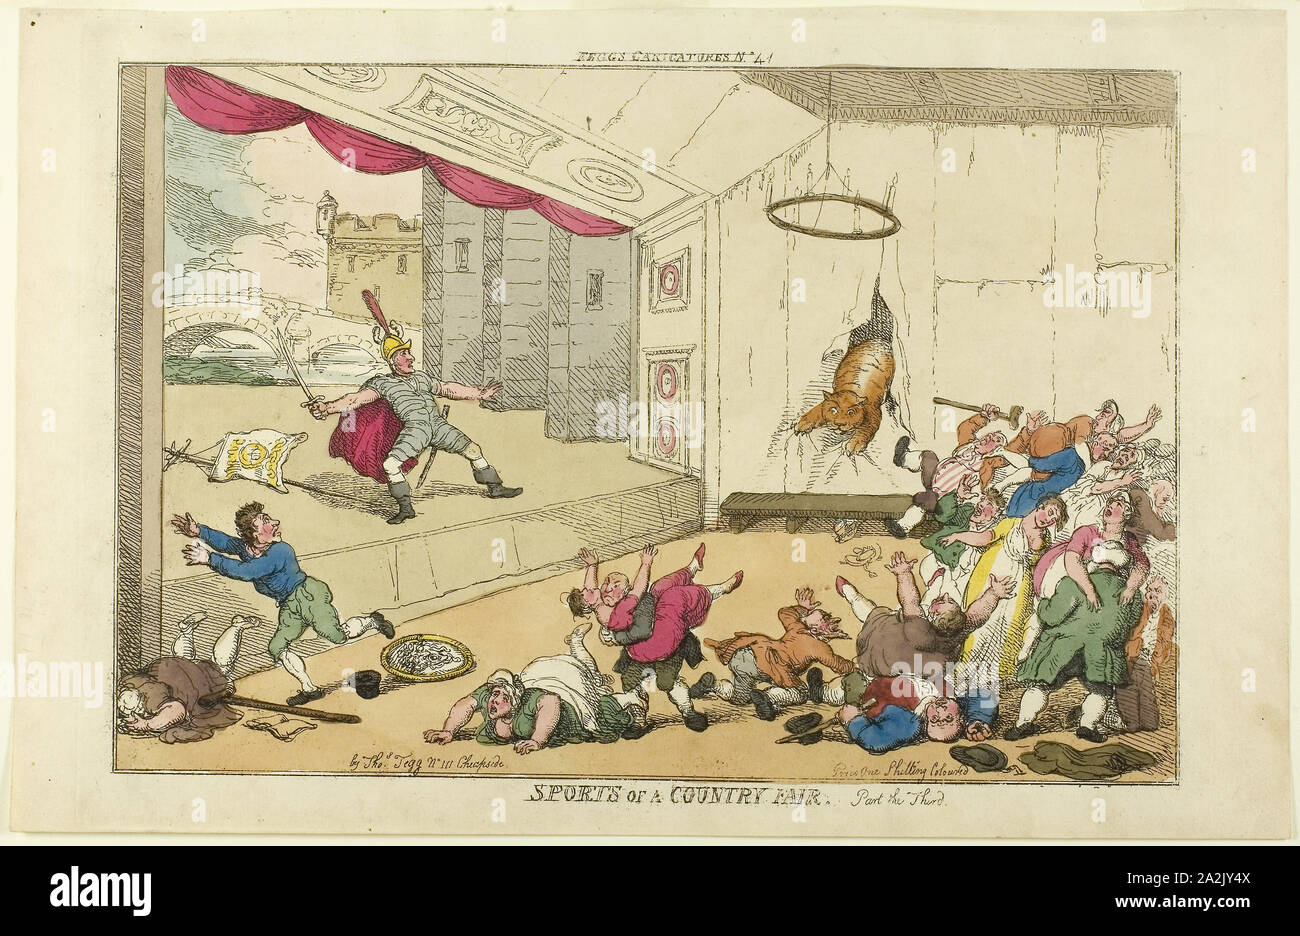 Sports of a Country Fair. Part the Third, 1810, Thomas Rowlandson (English, 1756-1827), published by Thomas Tegg (English, 1776-1845), England, Hand-colored etching on ivory wove paper, 220 × 325 mm (image), 250 × 348 mm (plate): 255 × 392 mm (sheet Stock Photo